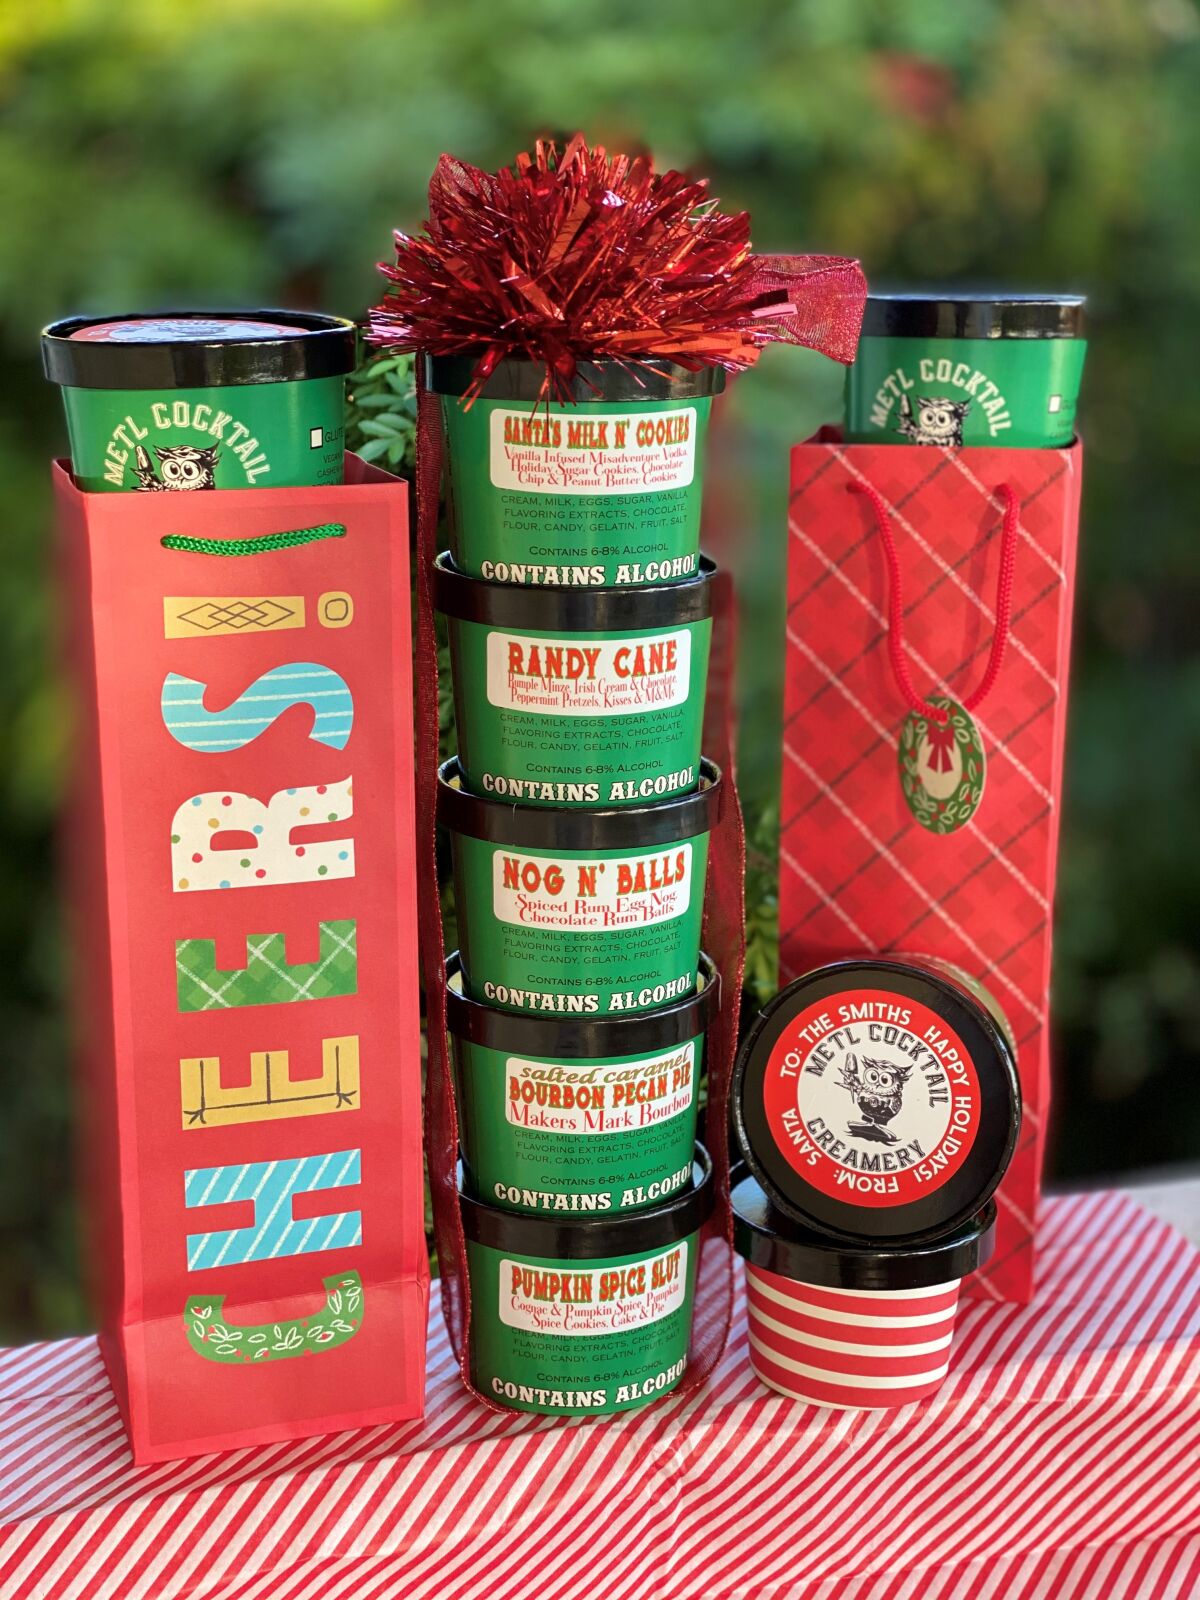 Boozy ice cream holiday packs from Metl.